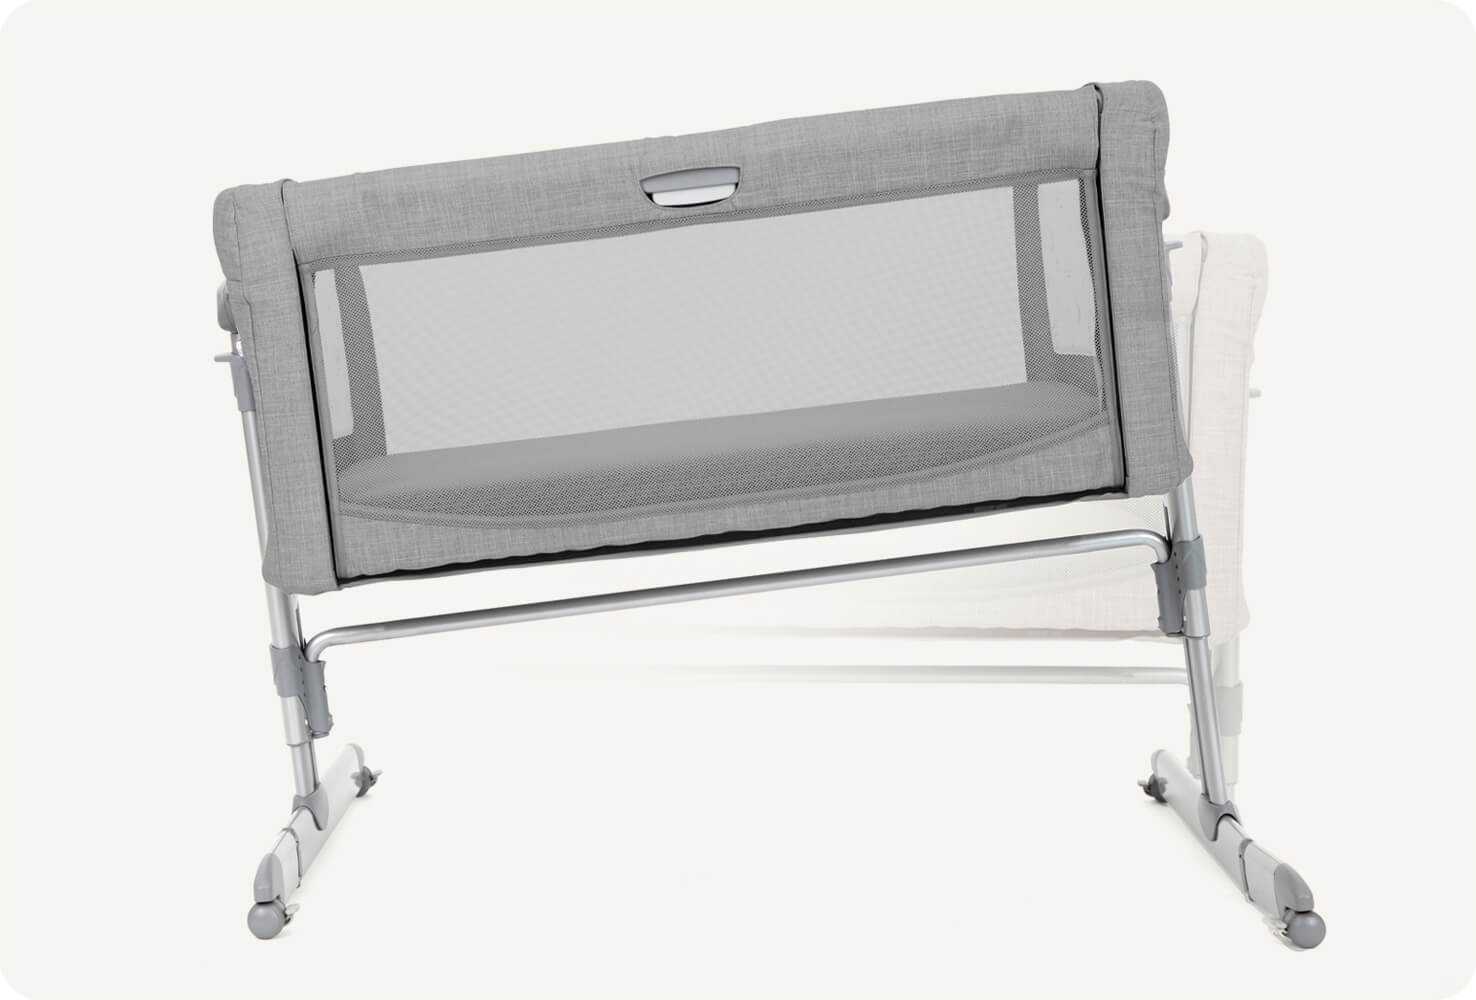   Front view of light grey Joie roomie glide bedside crib, displaying tilt feature.